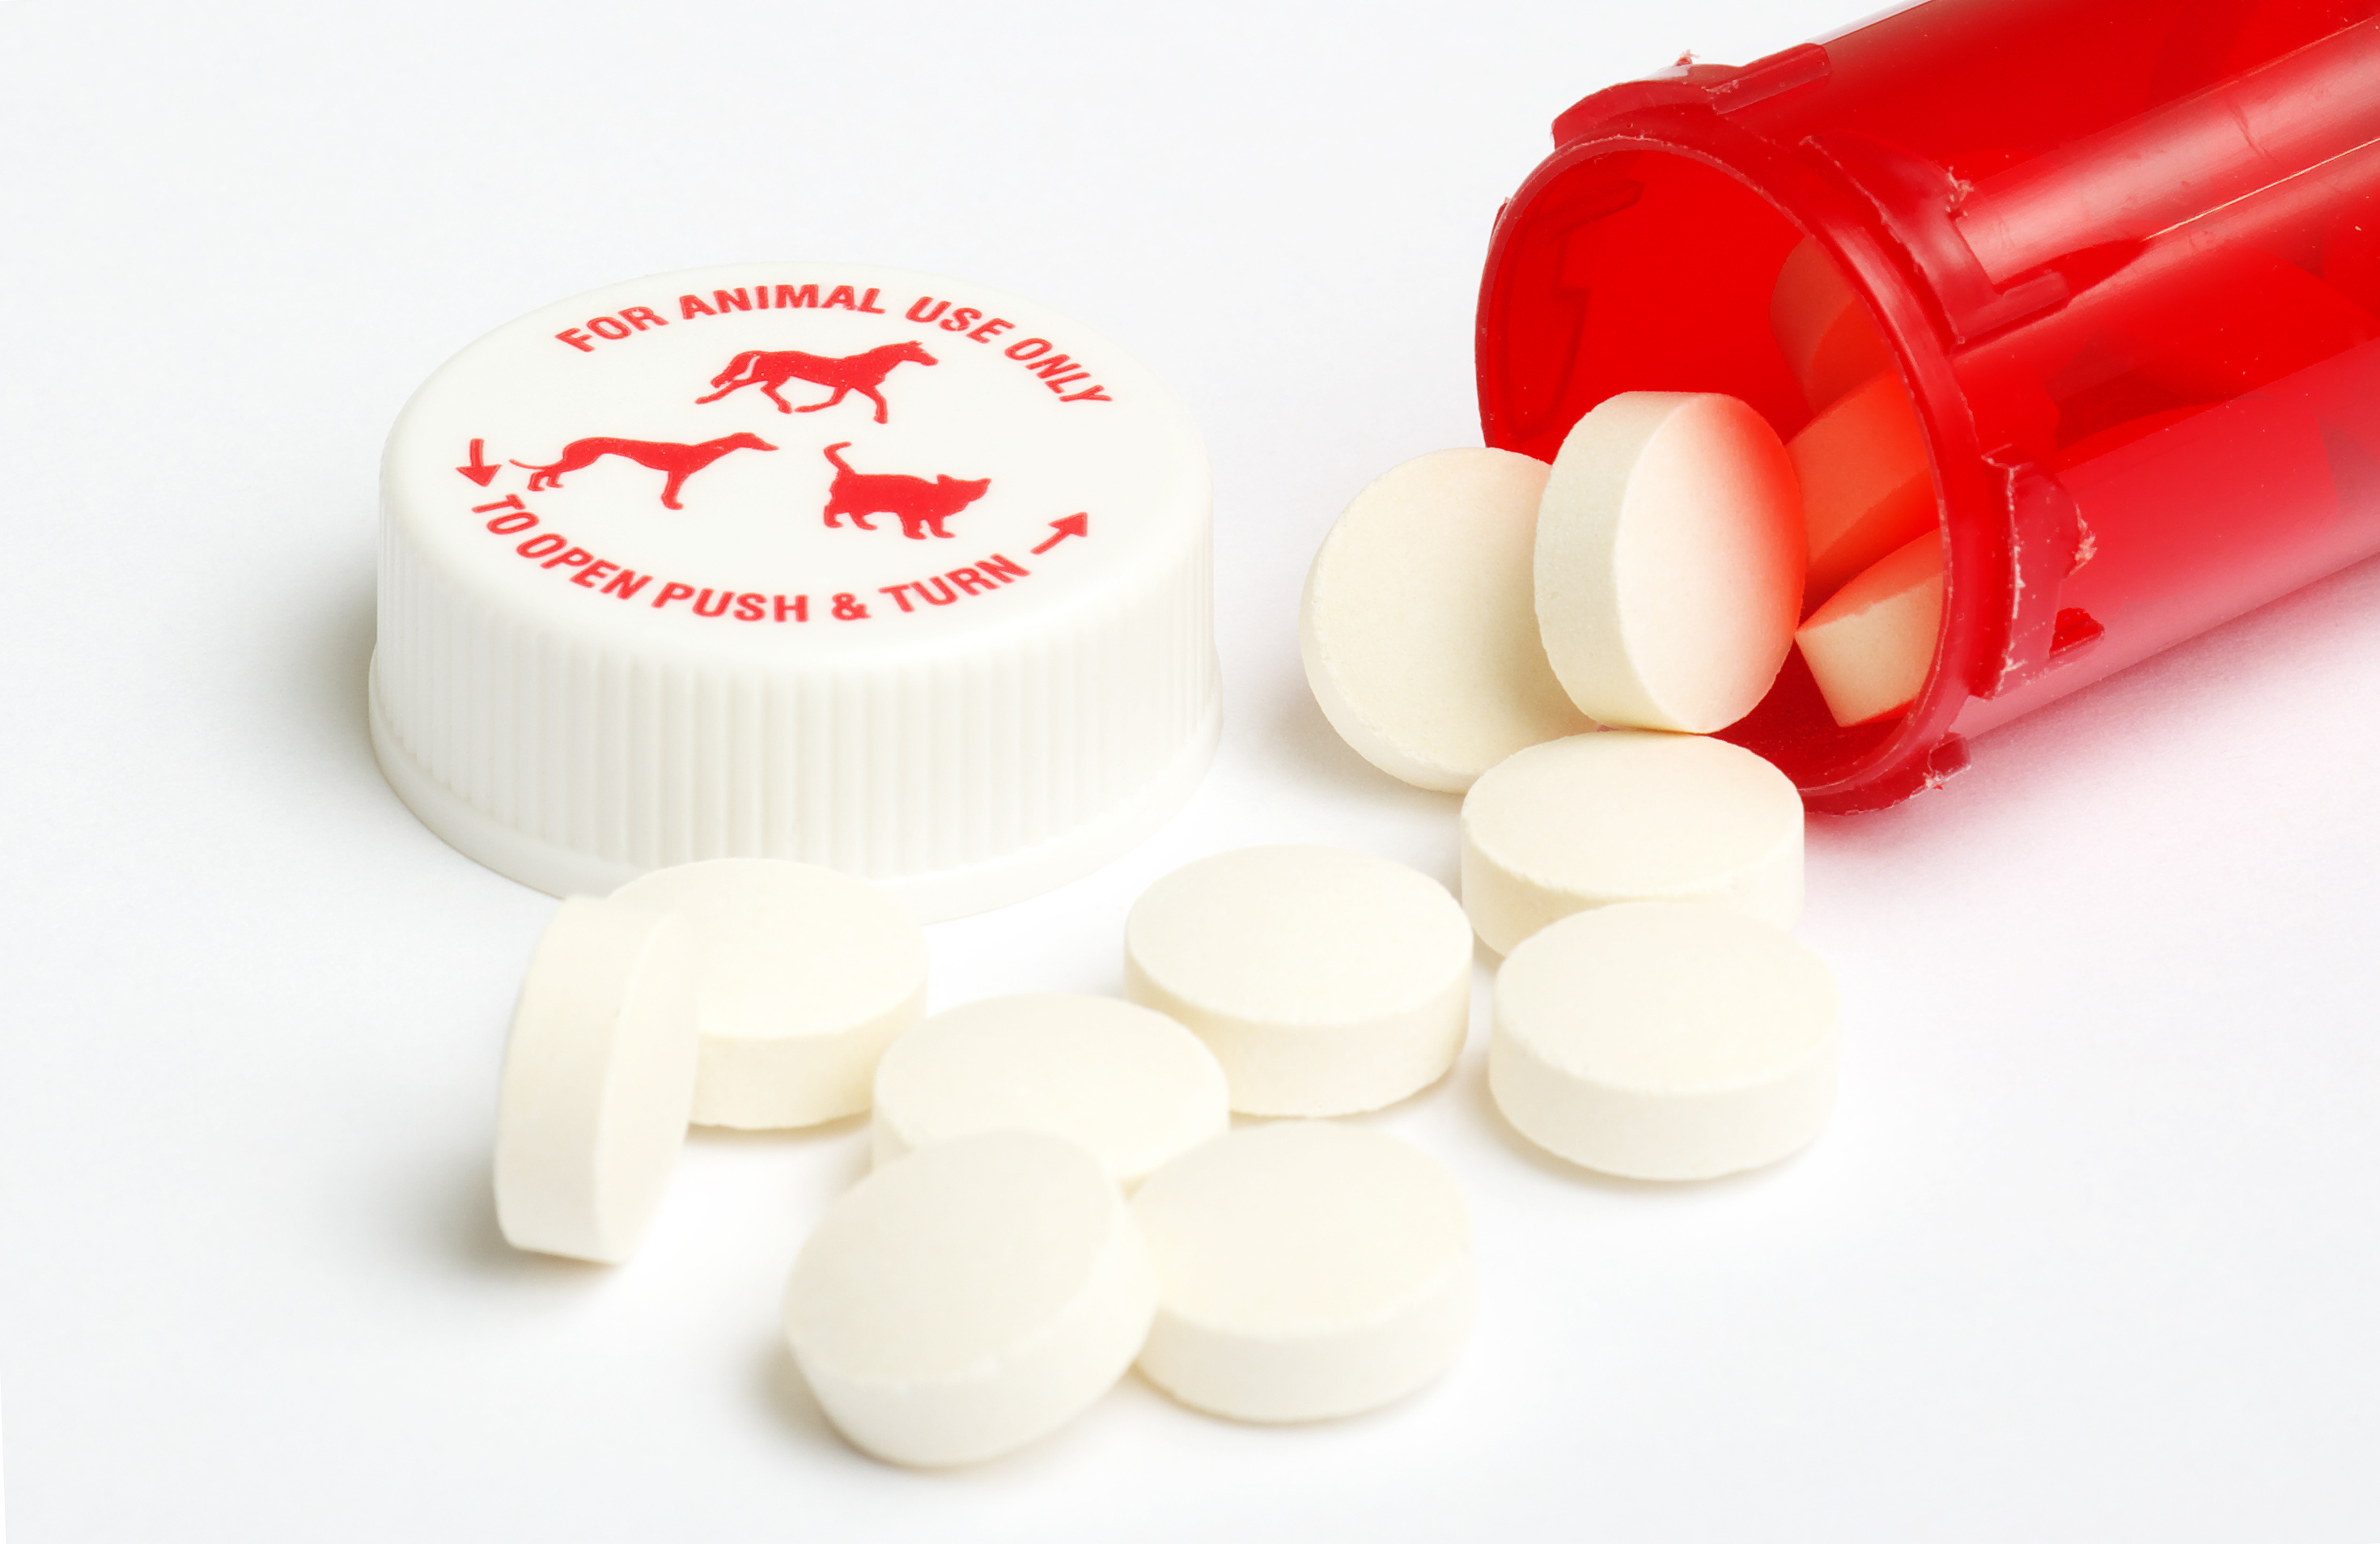 A bottle of veterinary medications.